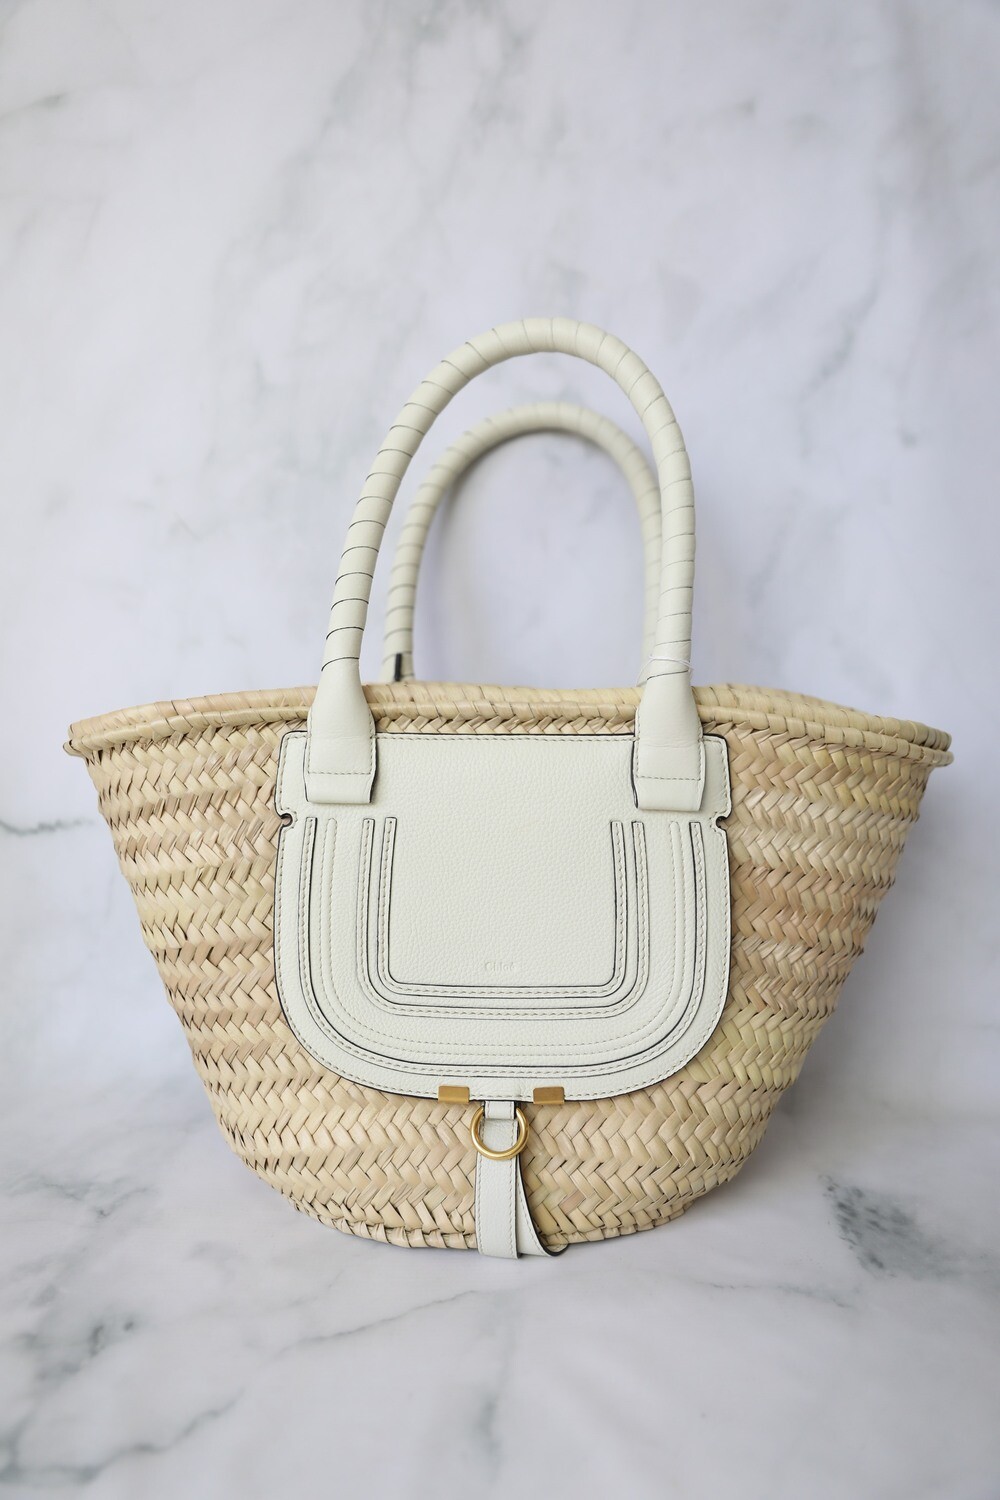 Chloe Marcie Tote, Woven Straw and White, Leather, Preowned No Dustbag WA001